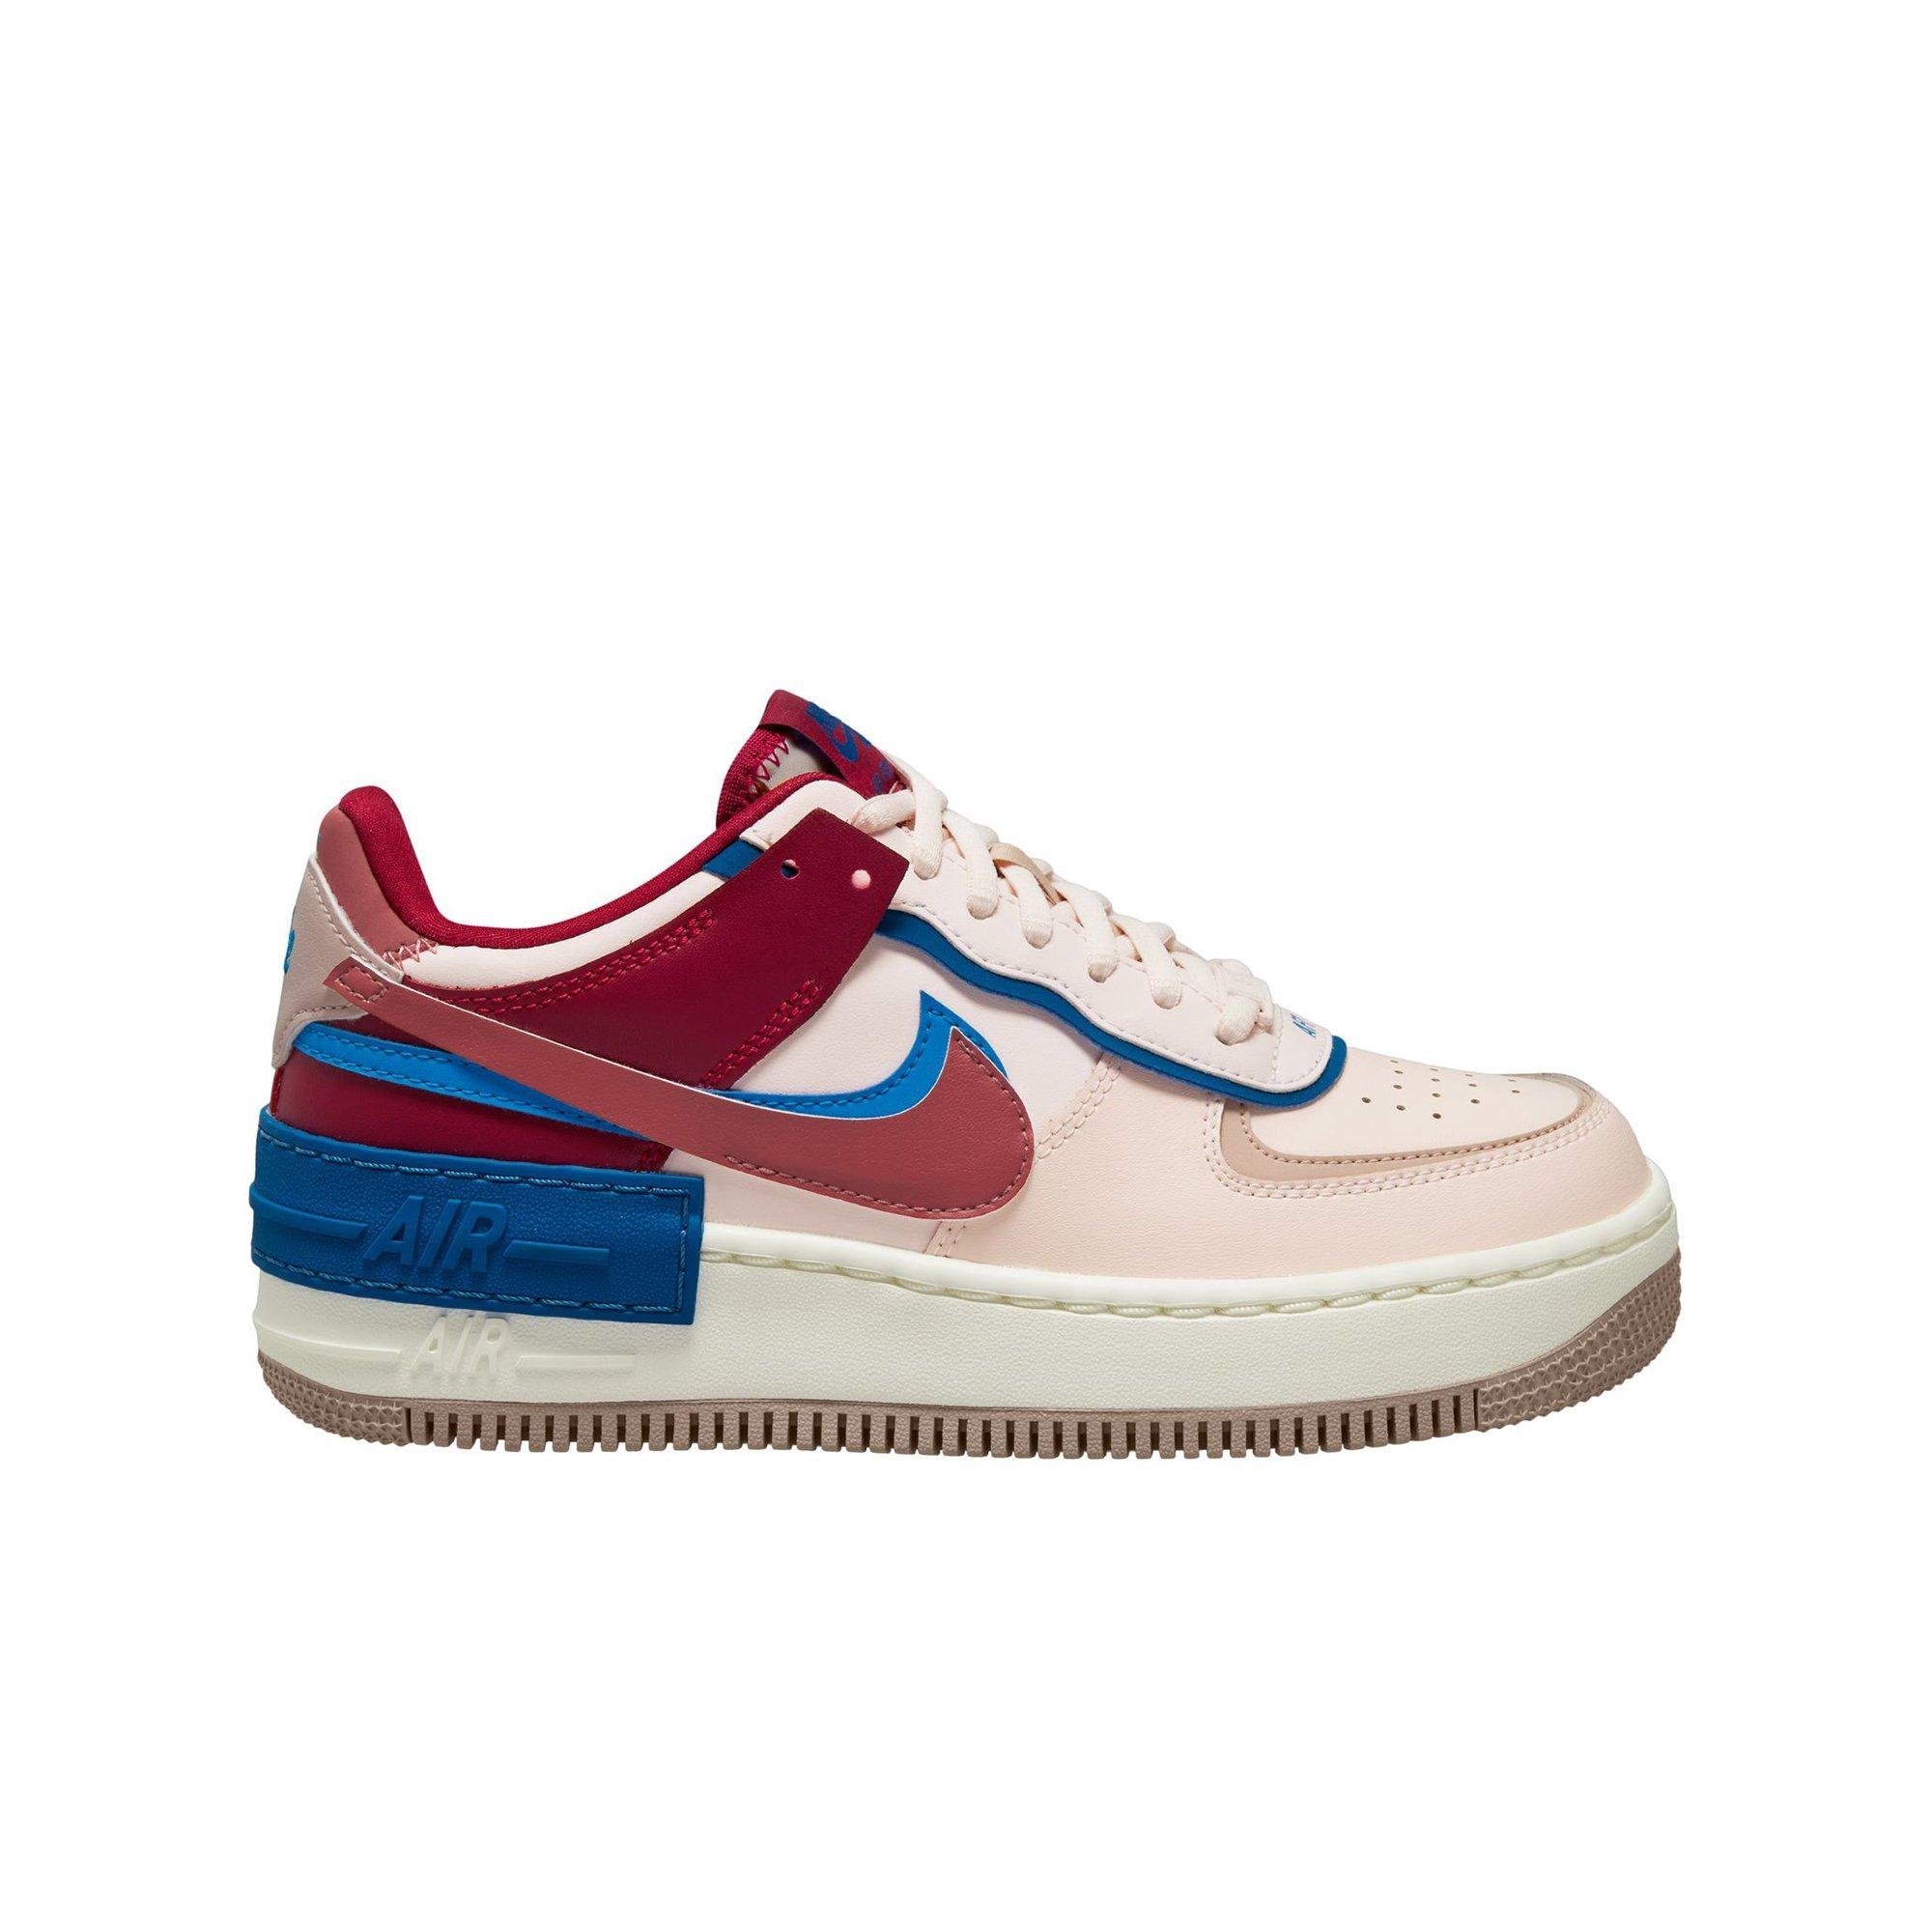 NIKE AIR FORCE 1 '07 TRIPLE WHITE PINK ROSE WOMEN/GIRL GS MULTI SIZE NEW AF1